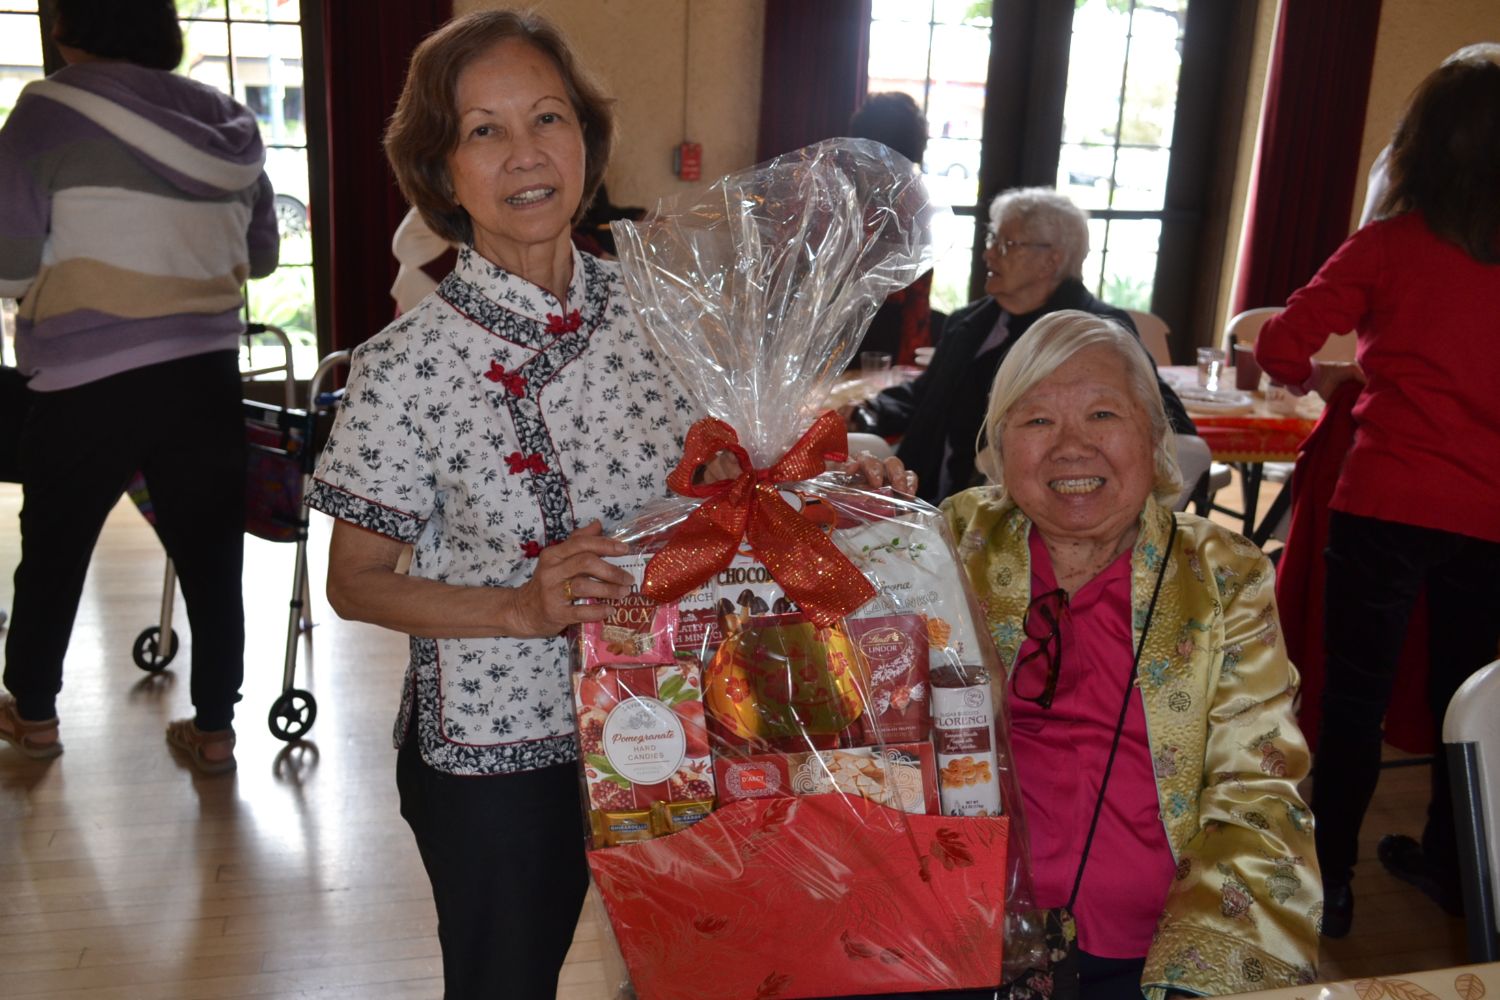 PHOTO: Alisa Hayashida | The South Pasadenan | Jessie Ivins and Irene Wong are very excited about these chocolates that they won at the Lunar New Year luncheon hosted by the Senior Center and South Pasadena Chinese American Club.